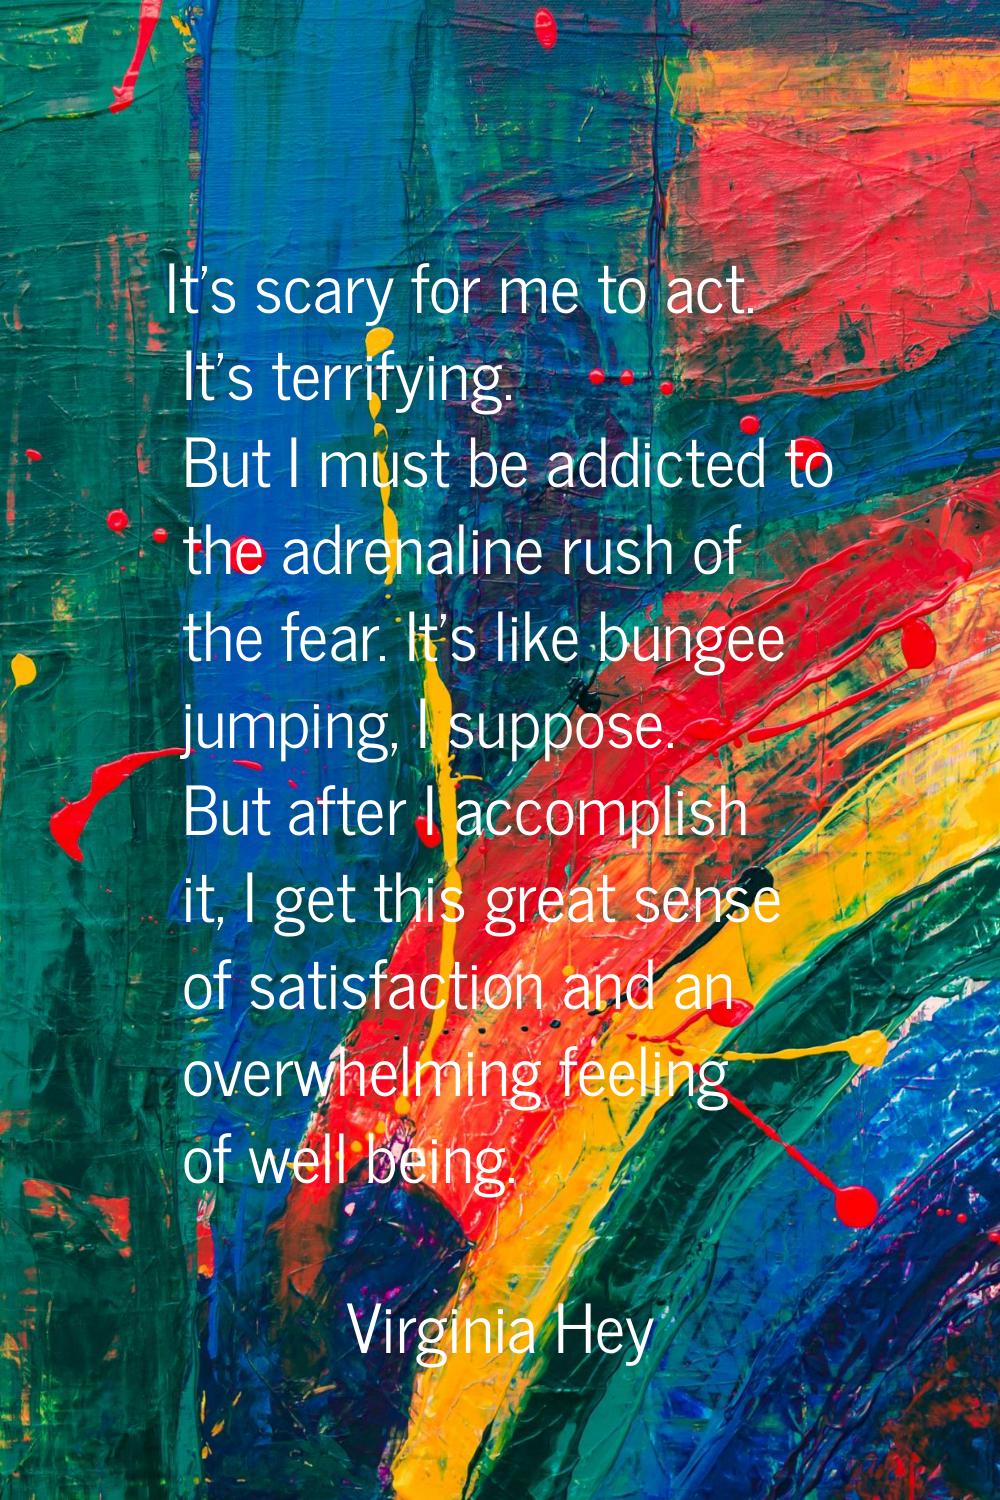 It's scary for me to act. It's terrifying. But I must be addicted to the adrenaline rush of the fea